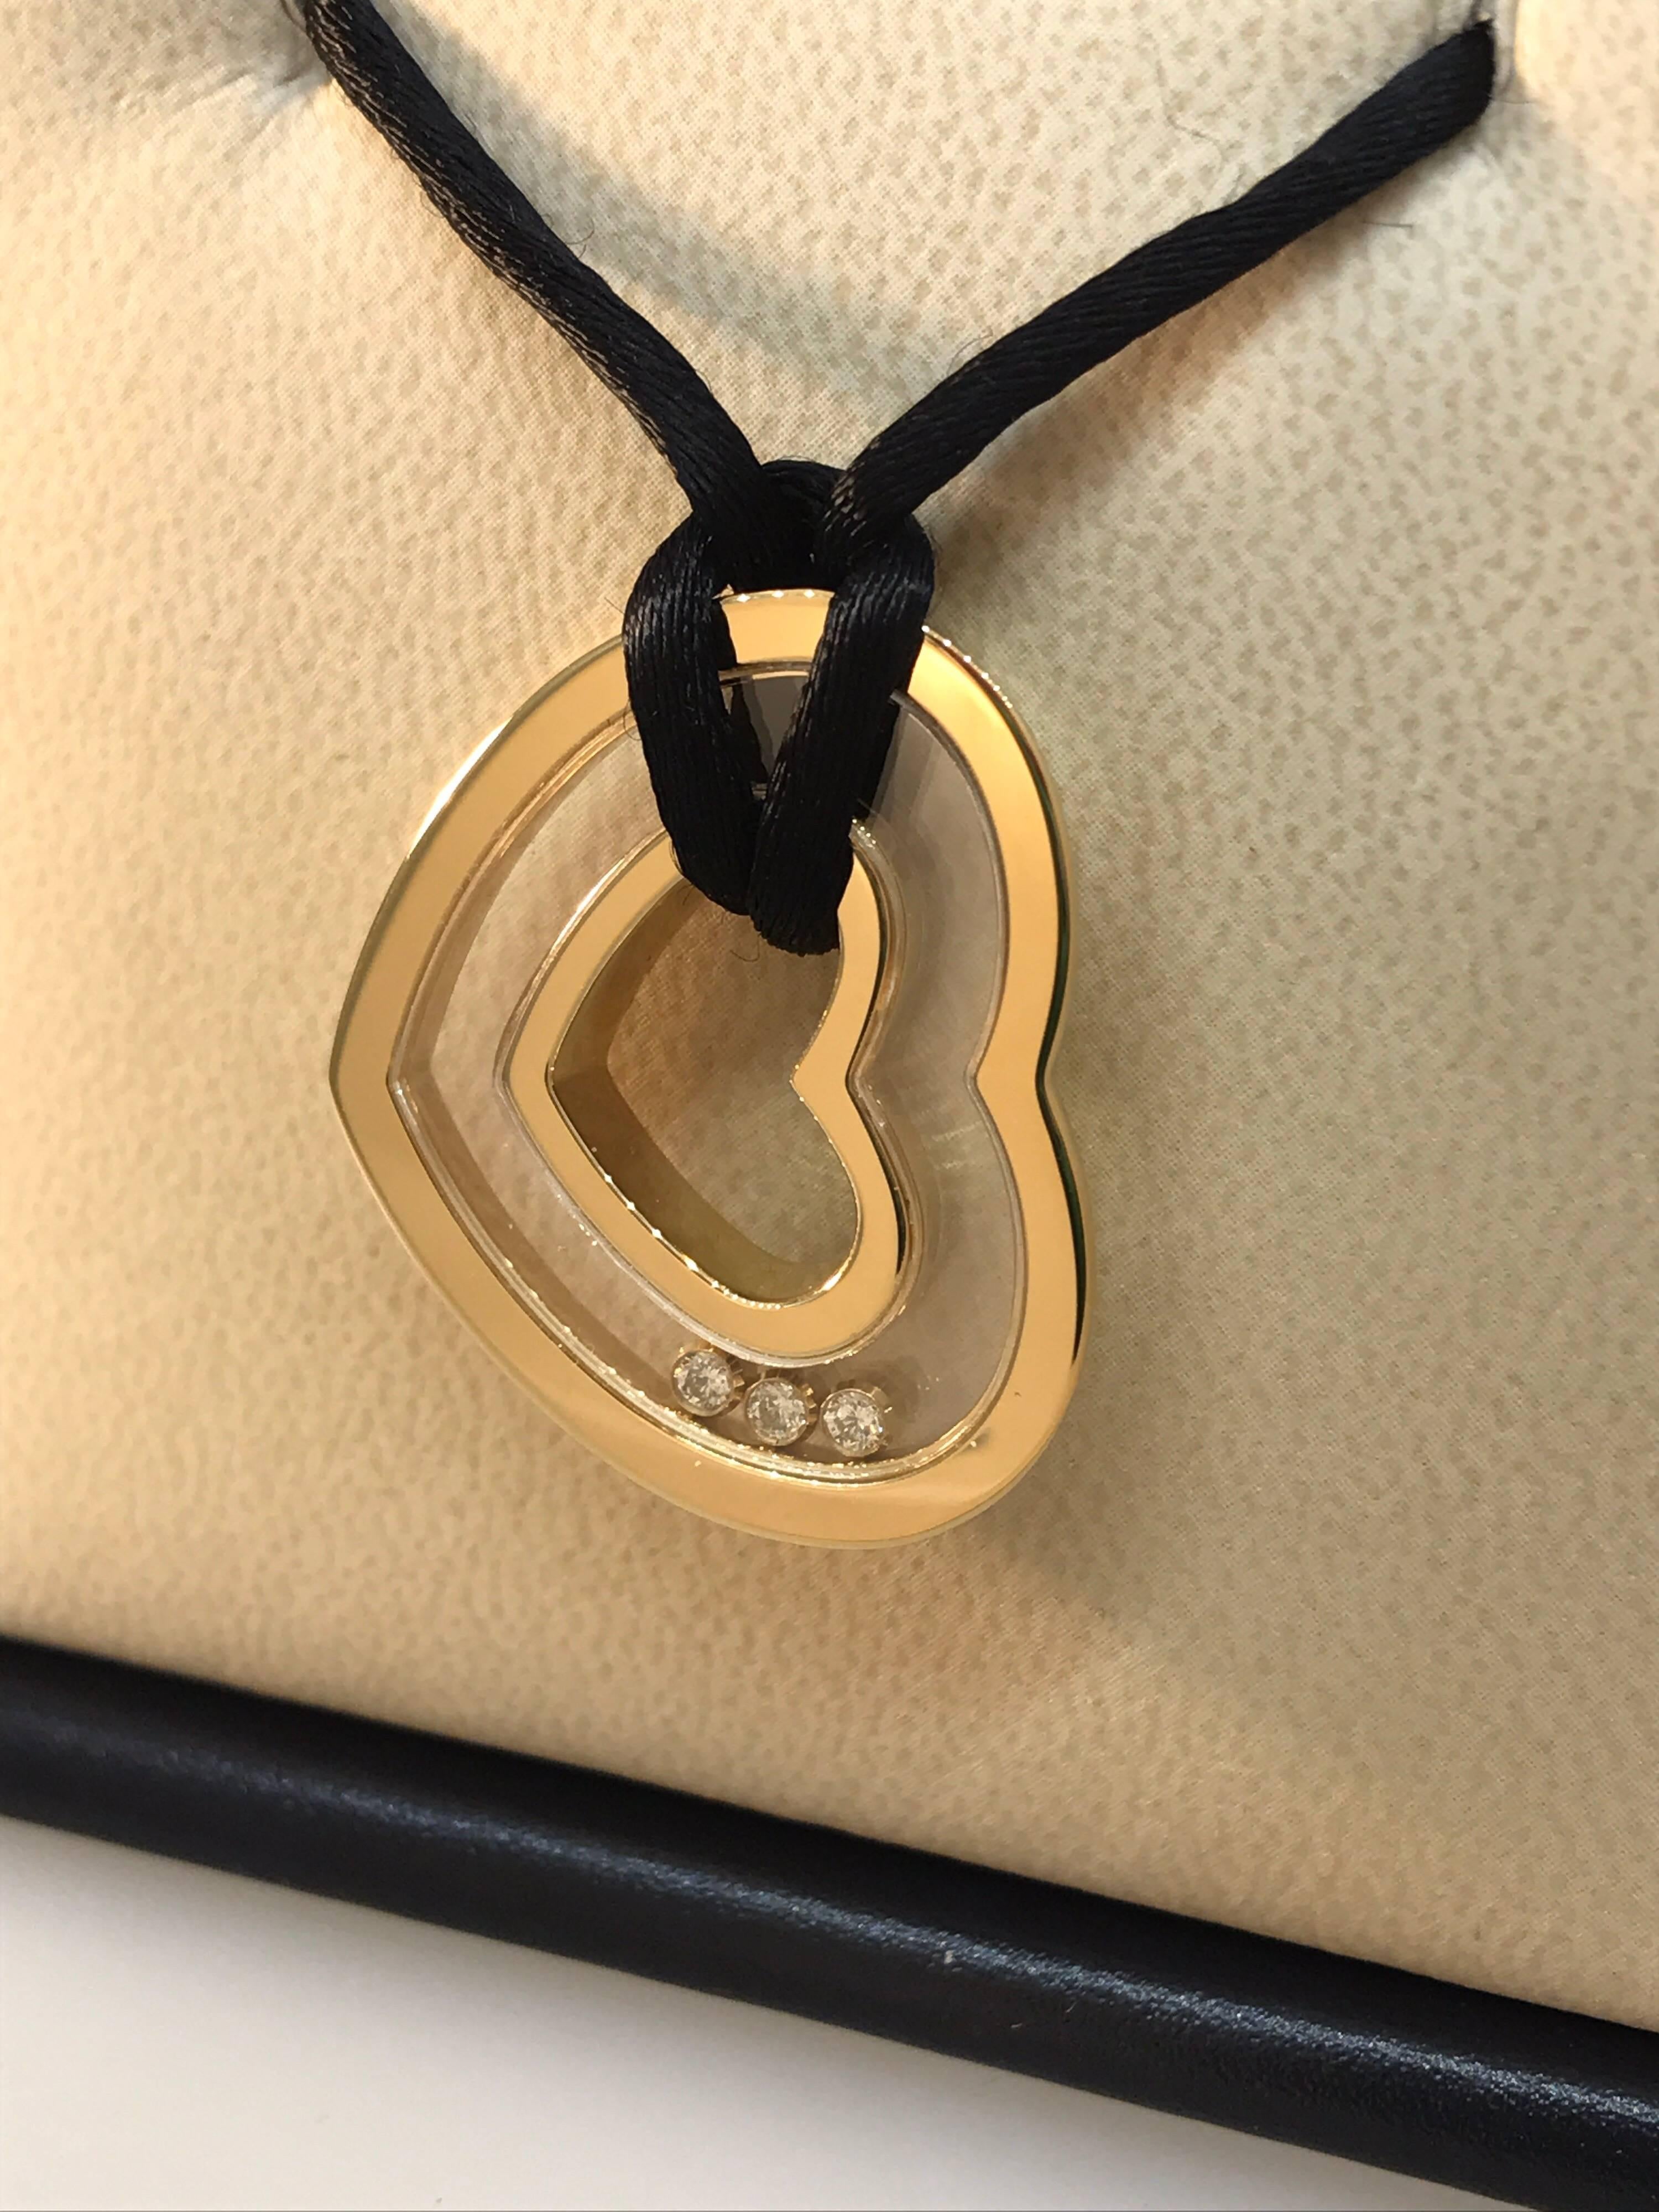 Chopard Happy Diamonds Heart Pendant / Necklace

Model Number: 79/6596-0001

100% Authentic

Brand New

Comes with original Chopard box, certificate of authenticity and warranty and jewels manual

18 Karat Yellow Gold (15.60gr)

3 Floating Diamonds